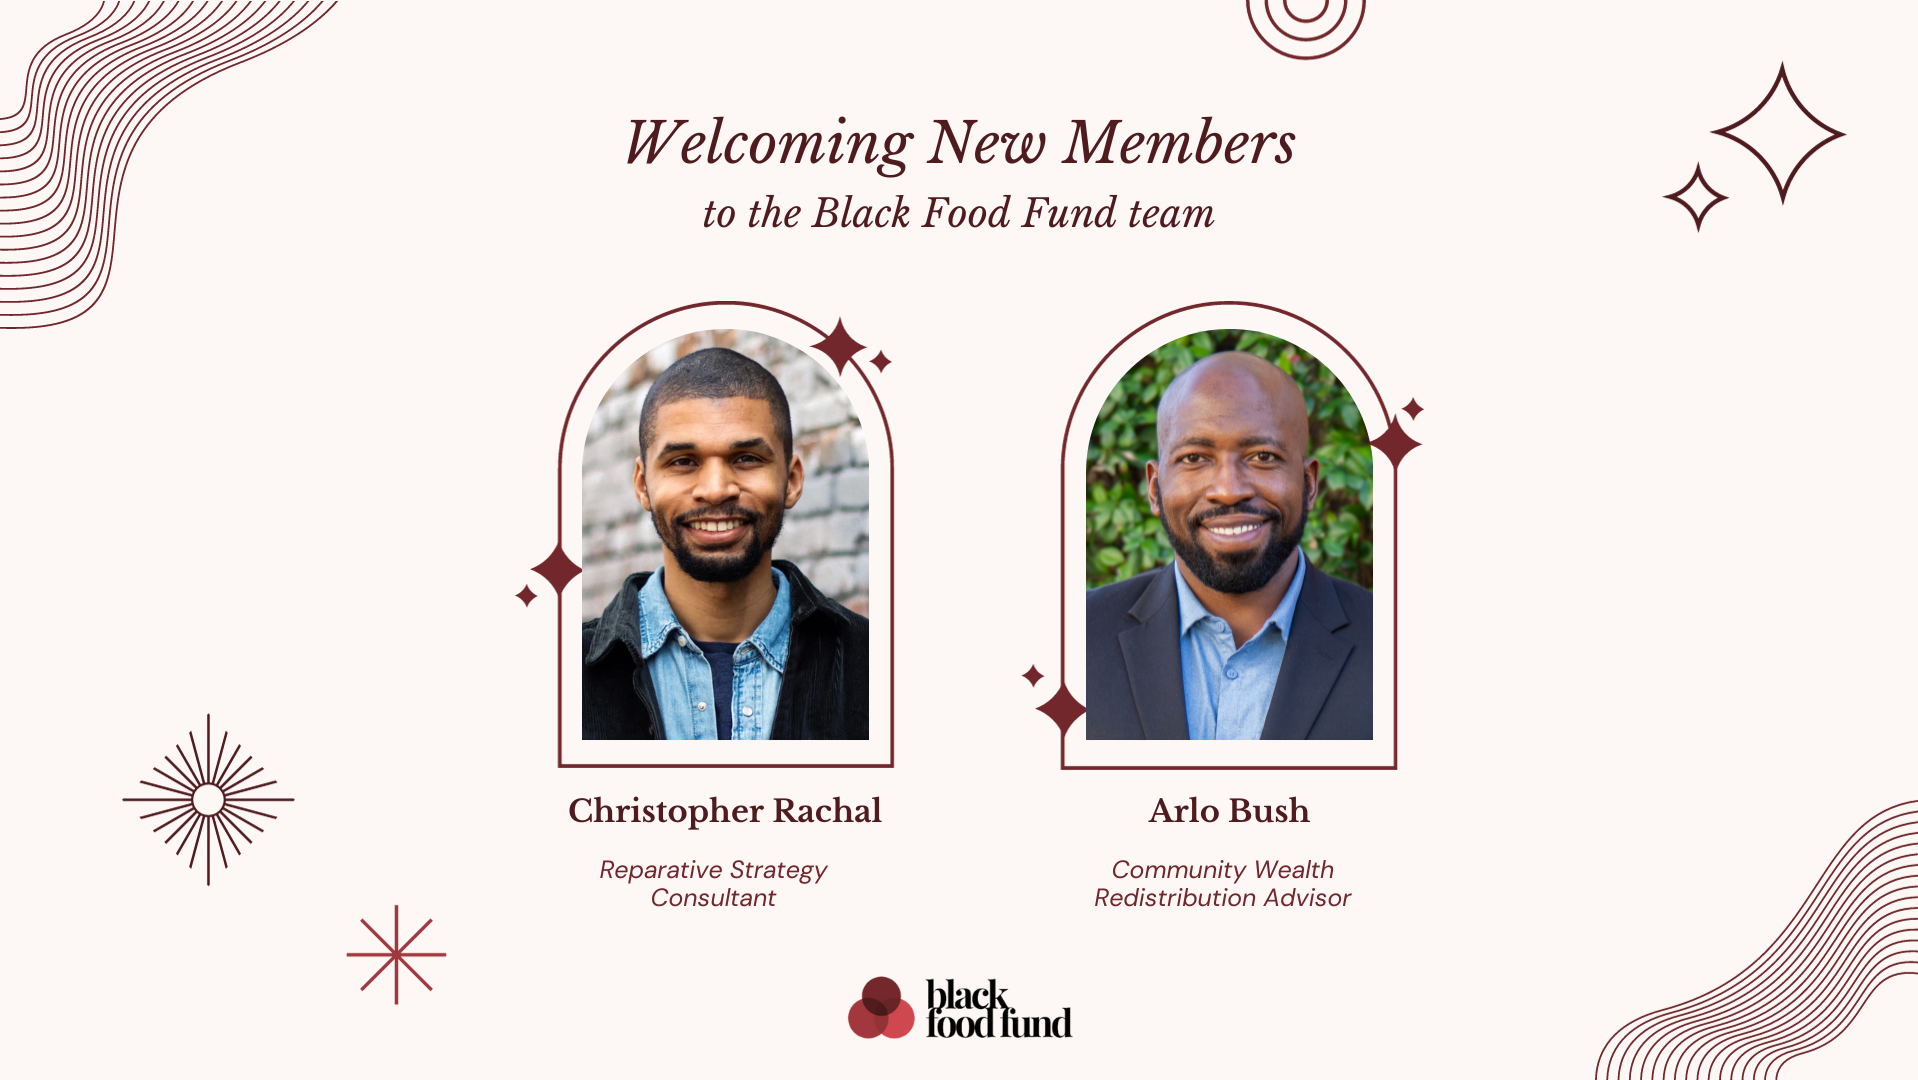 Christopher and Arlo join the Black Food Fund team